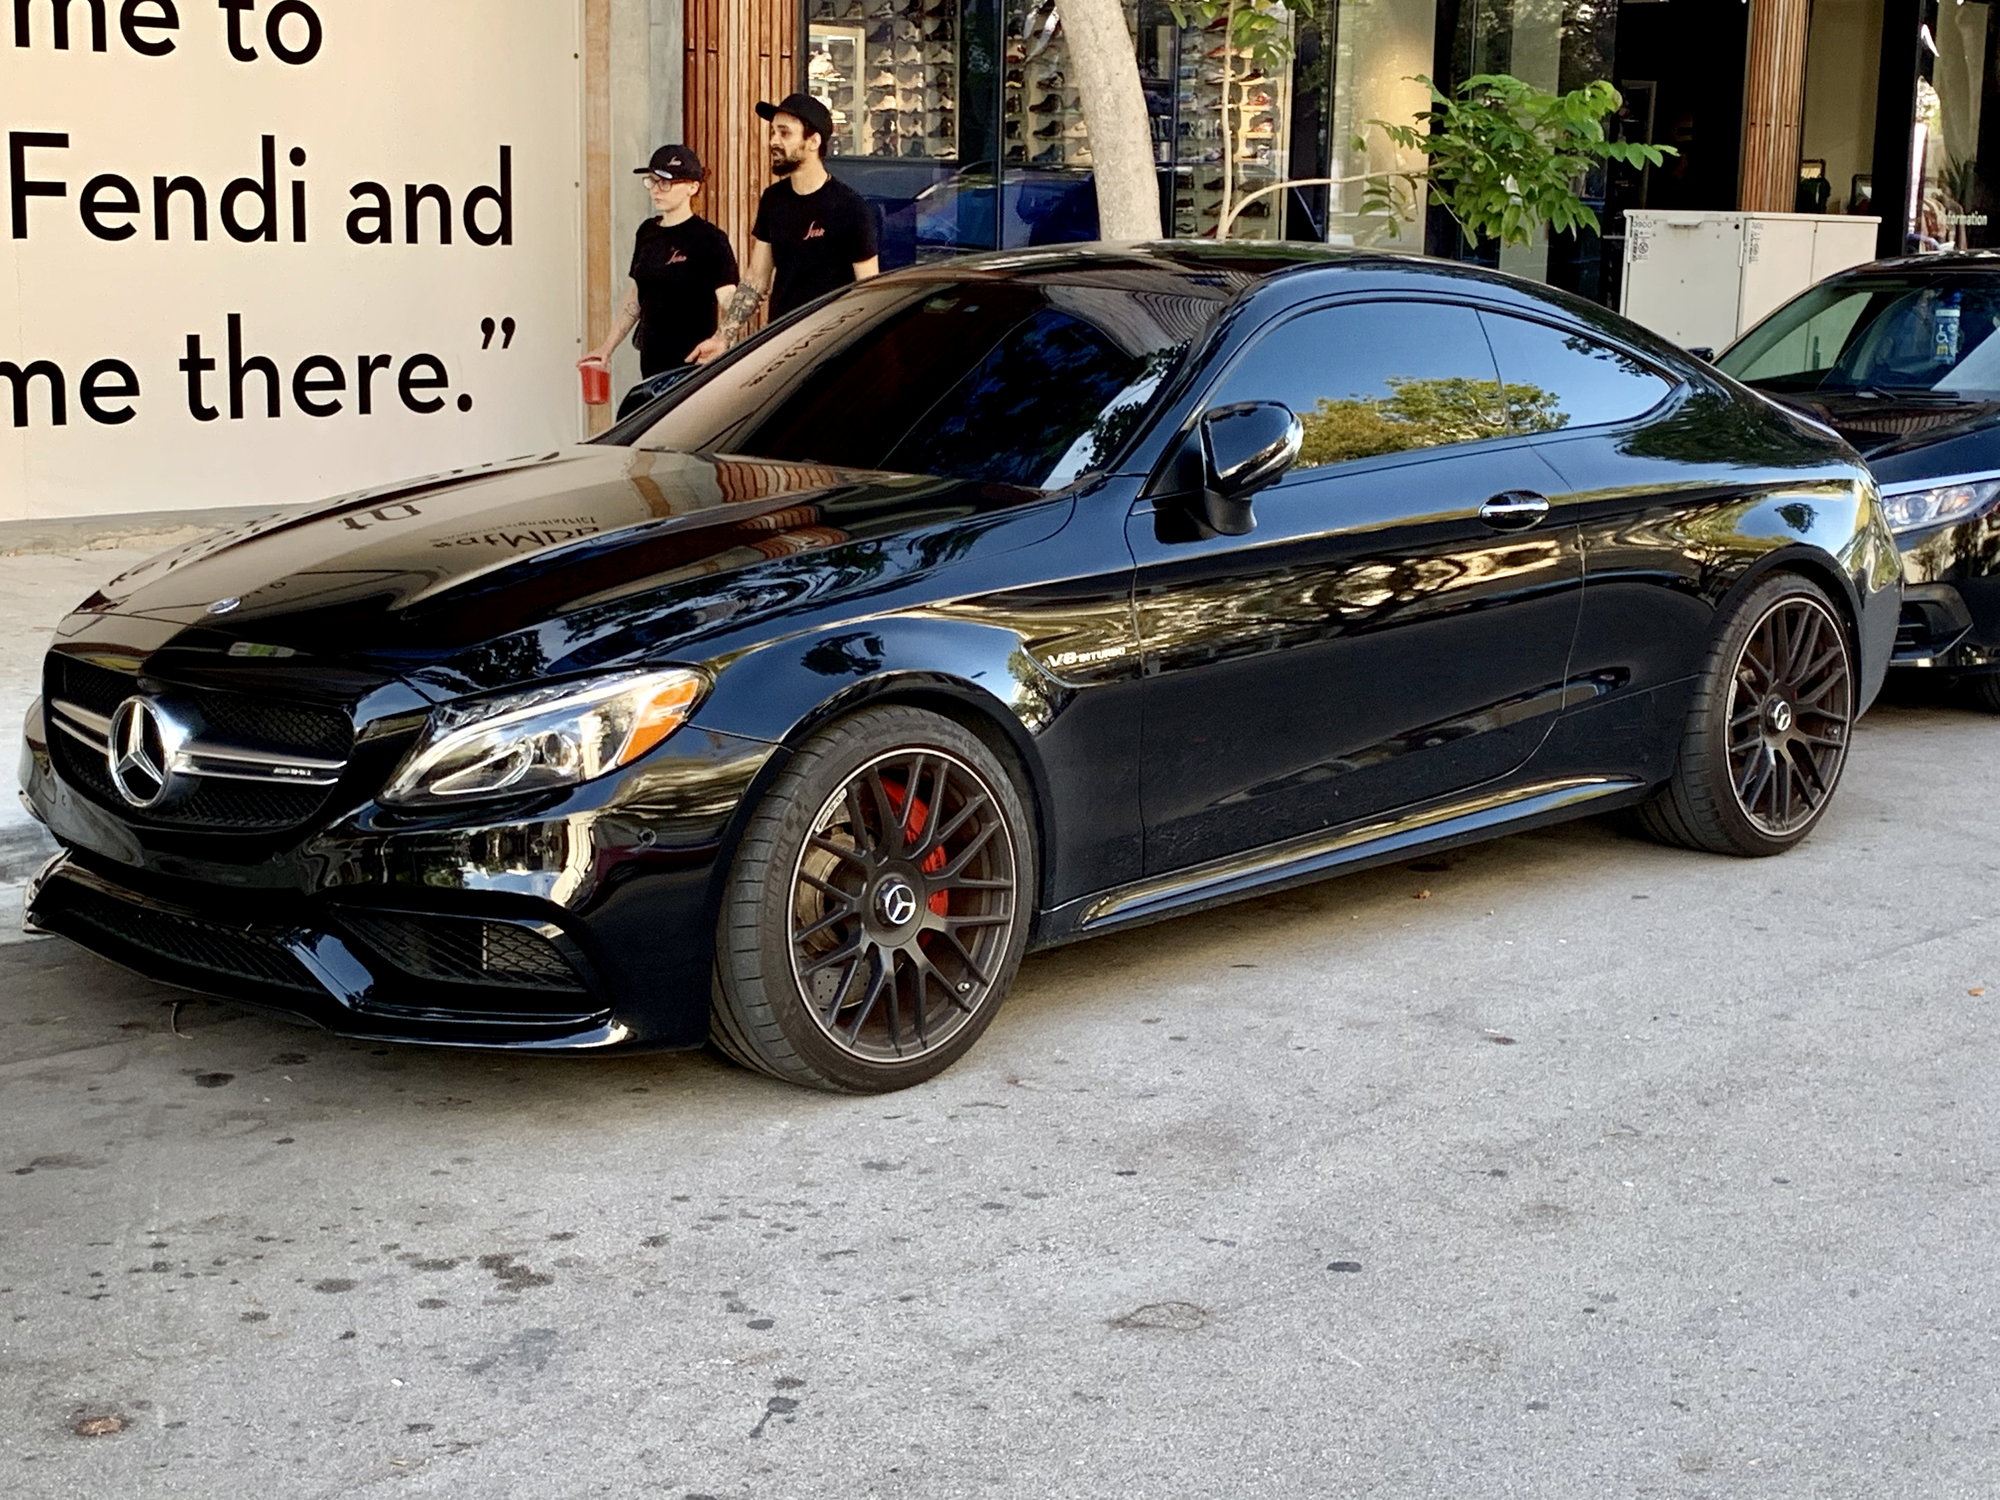 2017 Mercedes-Benz C63 AMG S - 2017 Mercedes Black C63 AMG S Coupe Dinan Tuned 609HP 656 TQ for Sale - Used - VIN WDDWJ8HB3HF477905 - 16,000 Miles - 8 cyl - 2WD - Automatic - Coupe - Black - Miami, FL 33131, United States